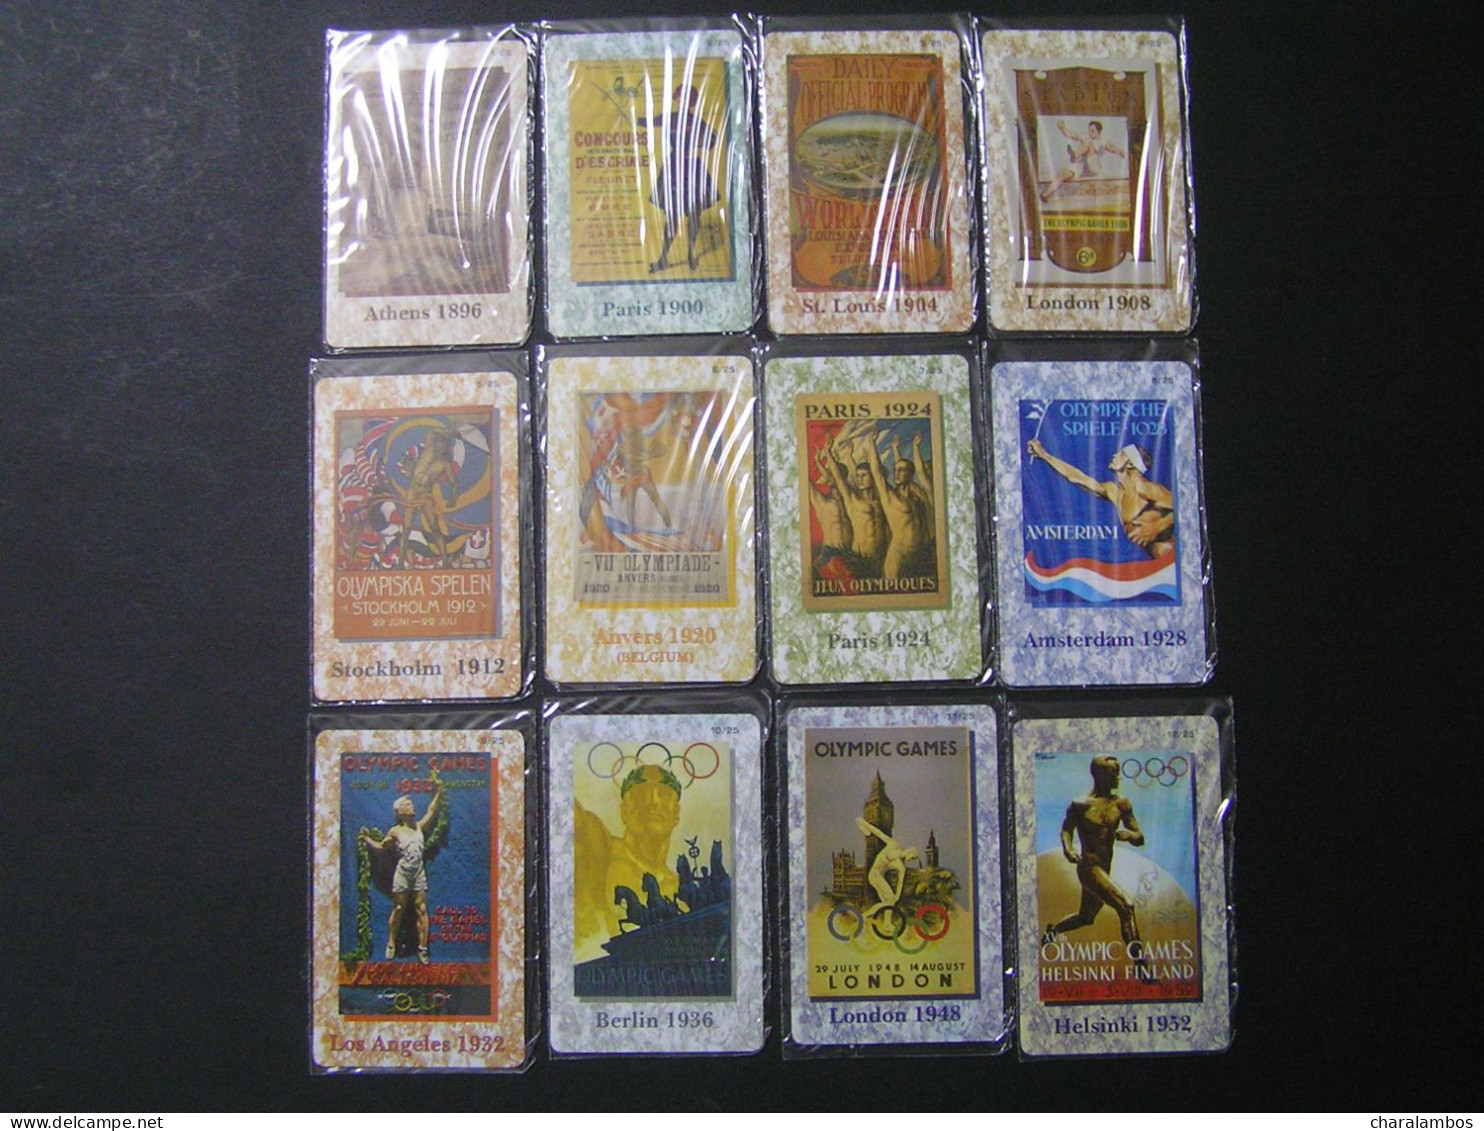 GREECE OLYMPIADS 1896-2004 25 Collectors Telephone Cards DVD ANCIENT OLYMPIA Birthplace Of The Olympic Games Folder Mind - Olympische Spiele